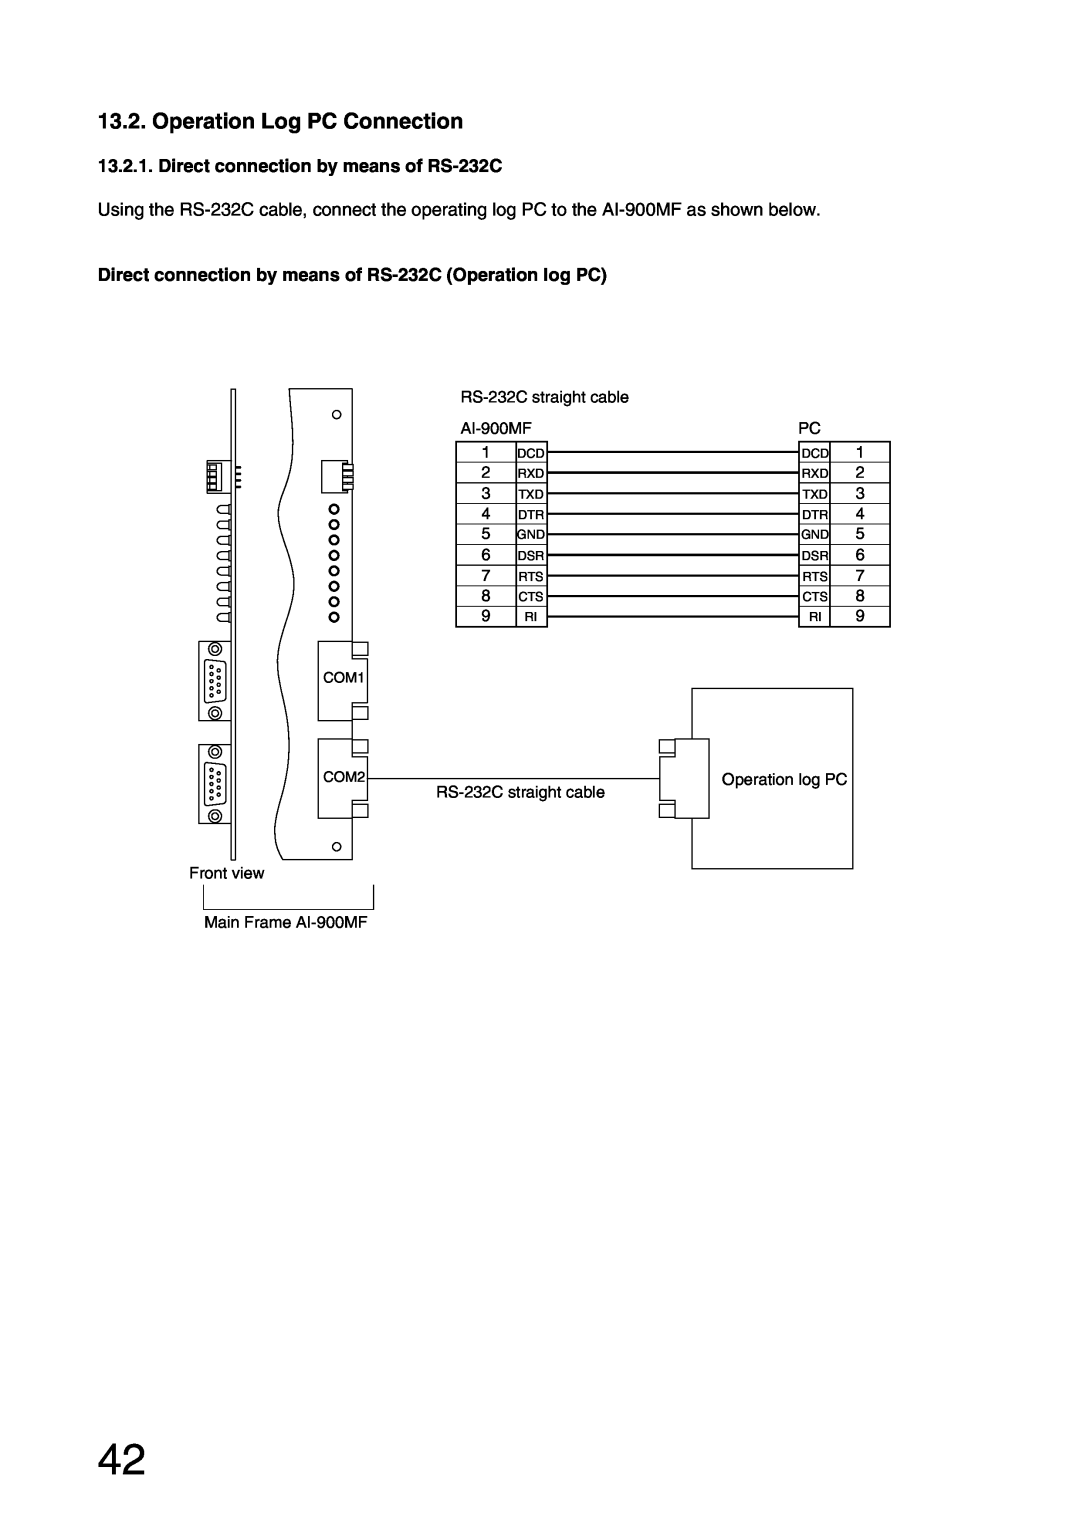 Aiphone AI-900 installation manual Operation Log PC Connection, Direct connection by means of RS-232C 